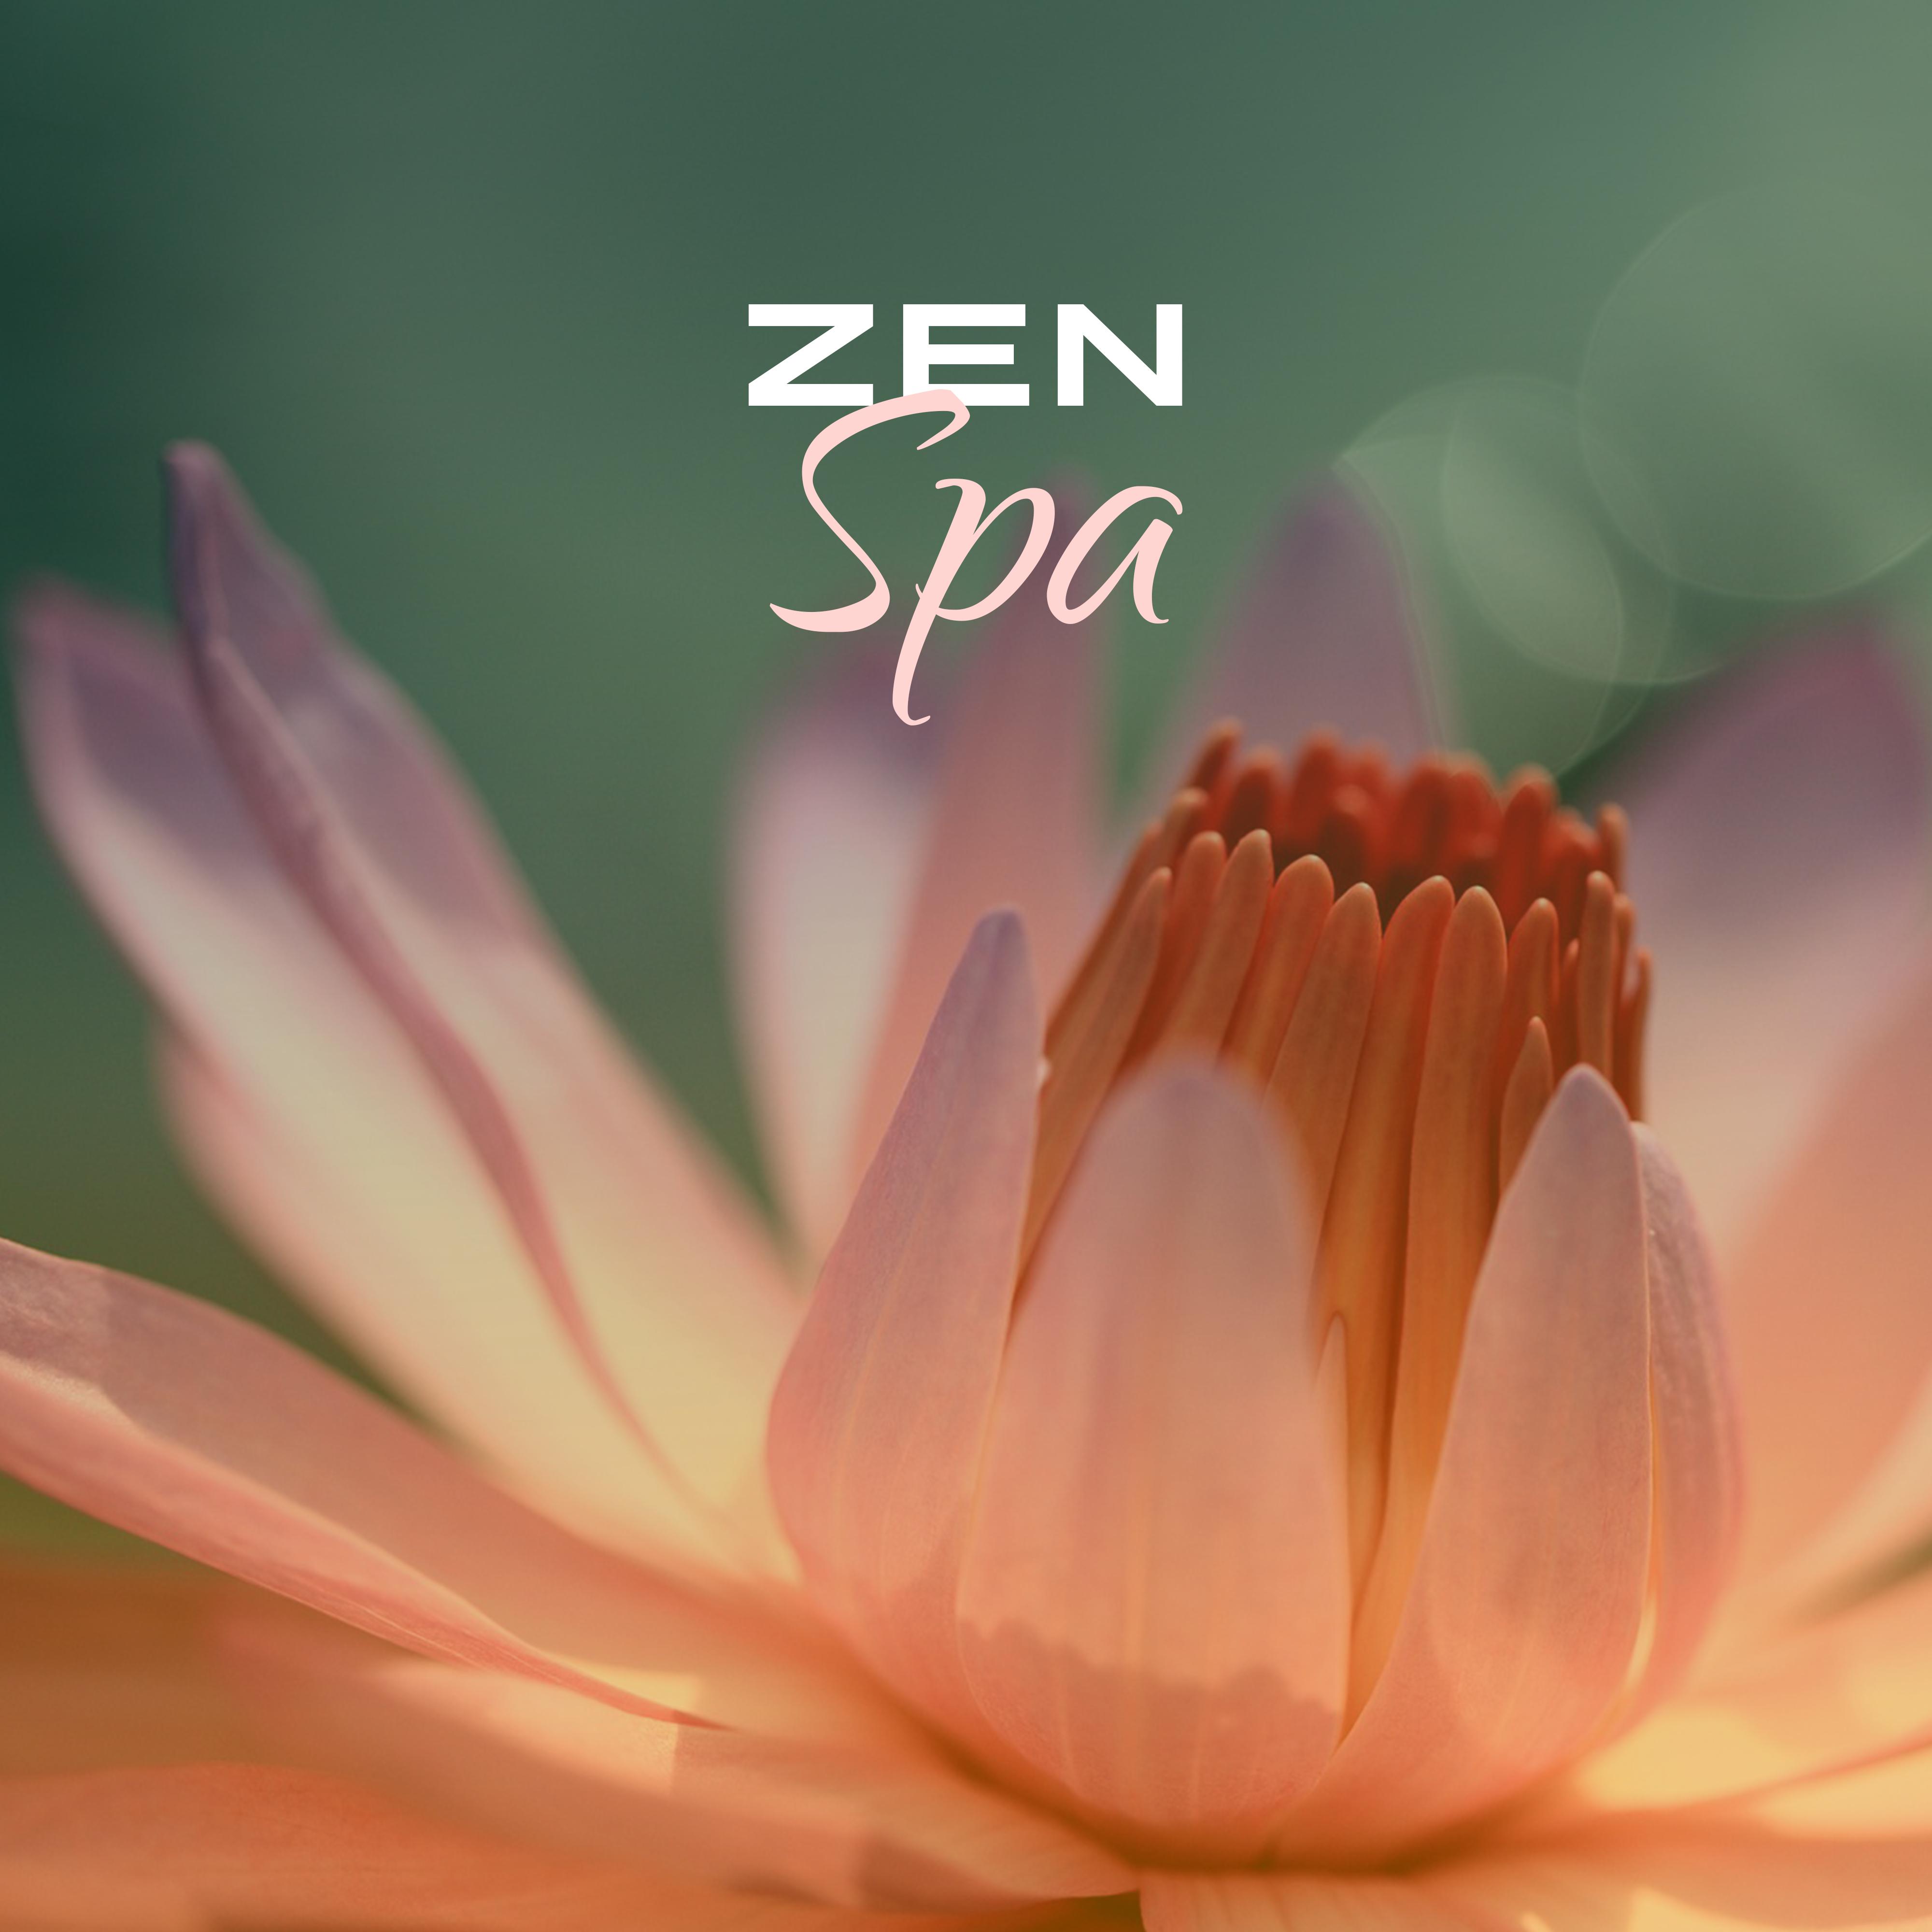 Zen Spa  Relaxing Music for Wellness, Massage, Therapy Music, Stress Relief, Inner Harmony, Spa Dreams, Relax